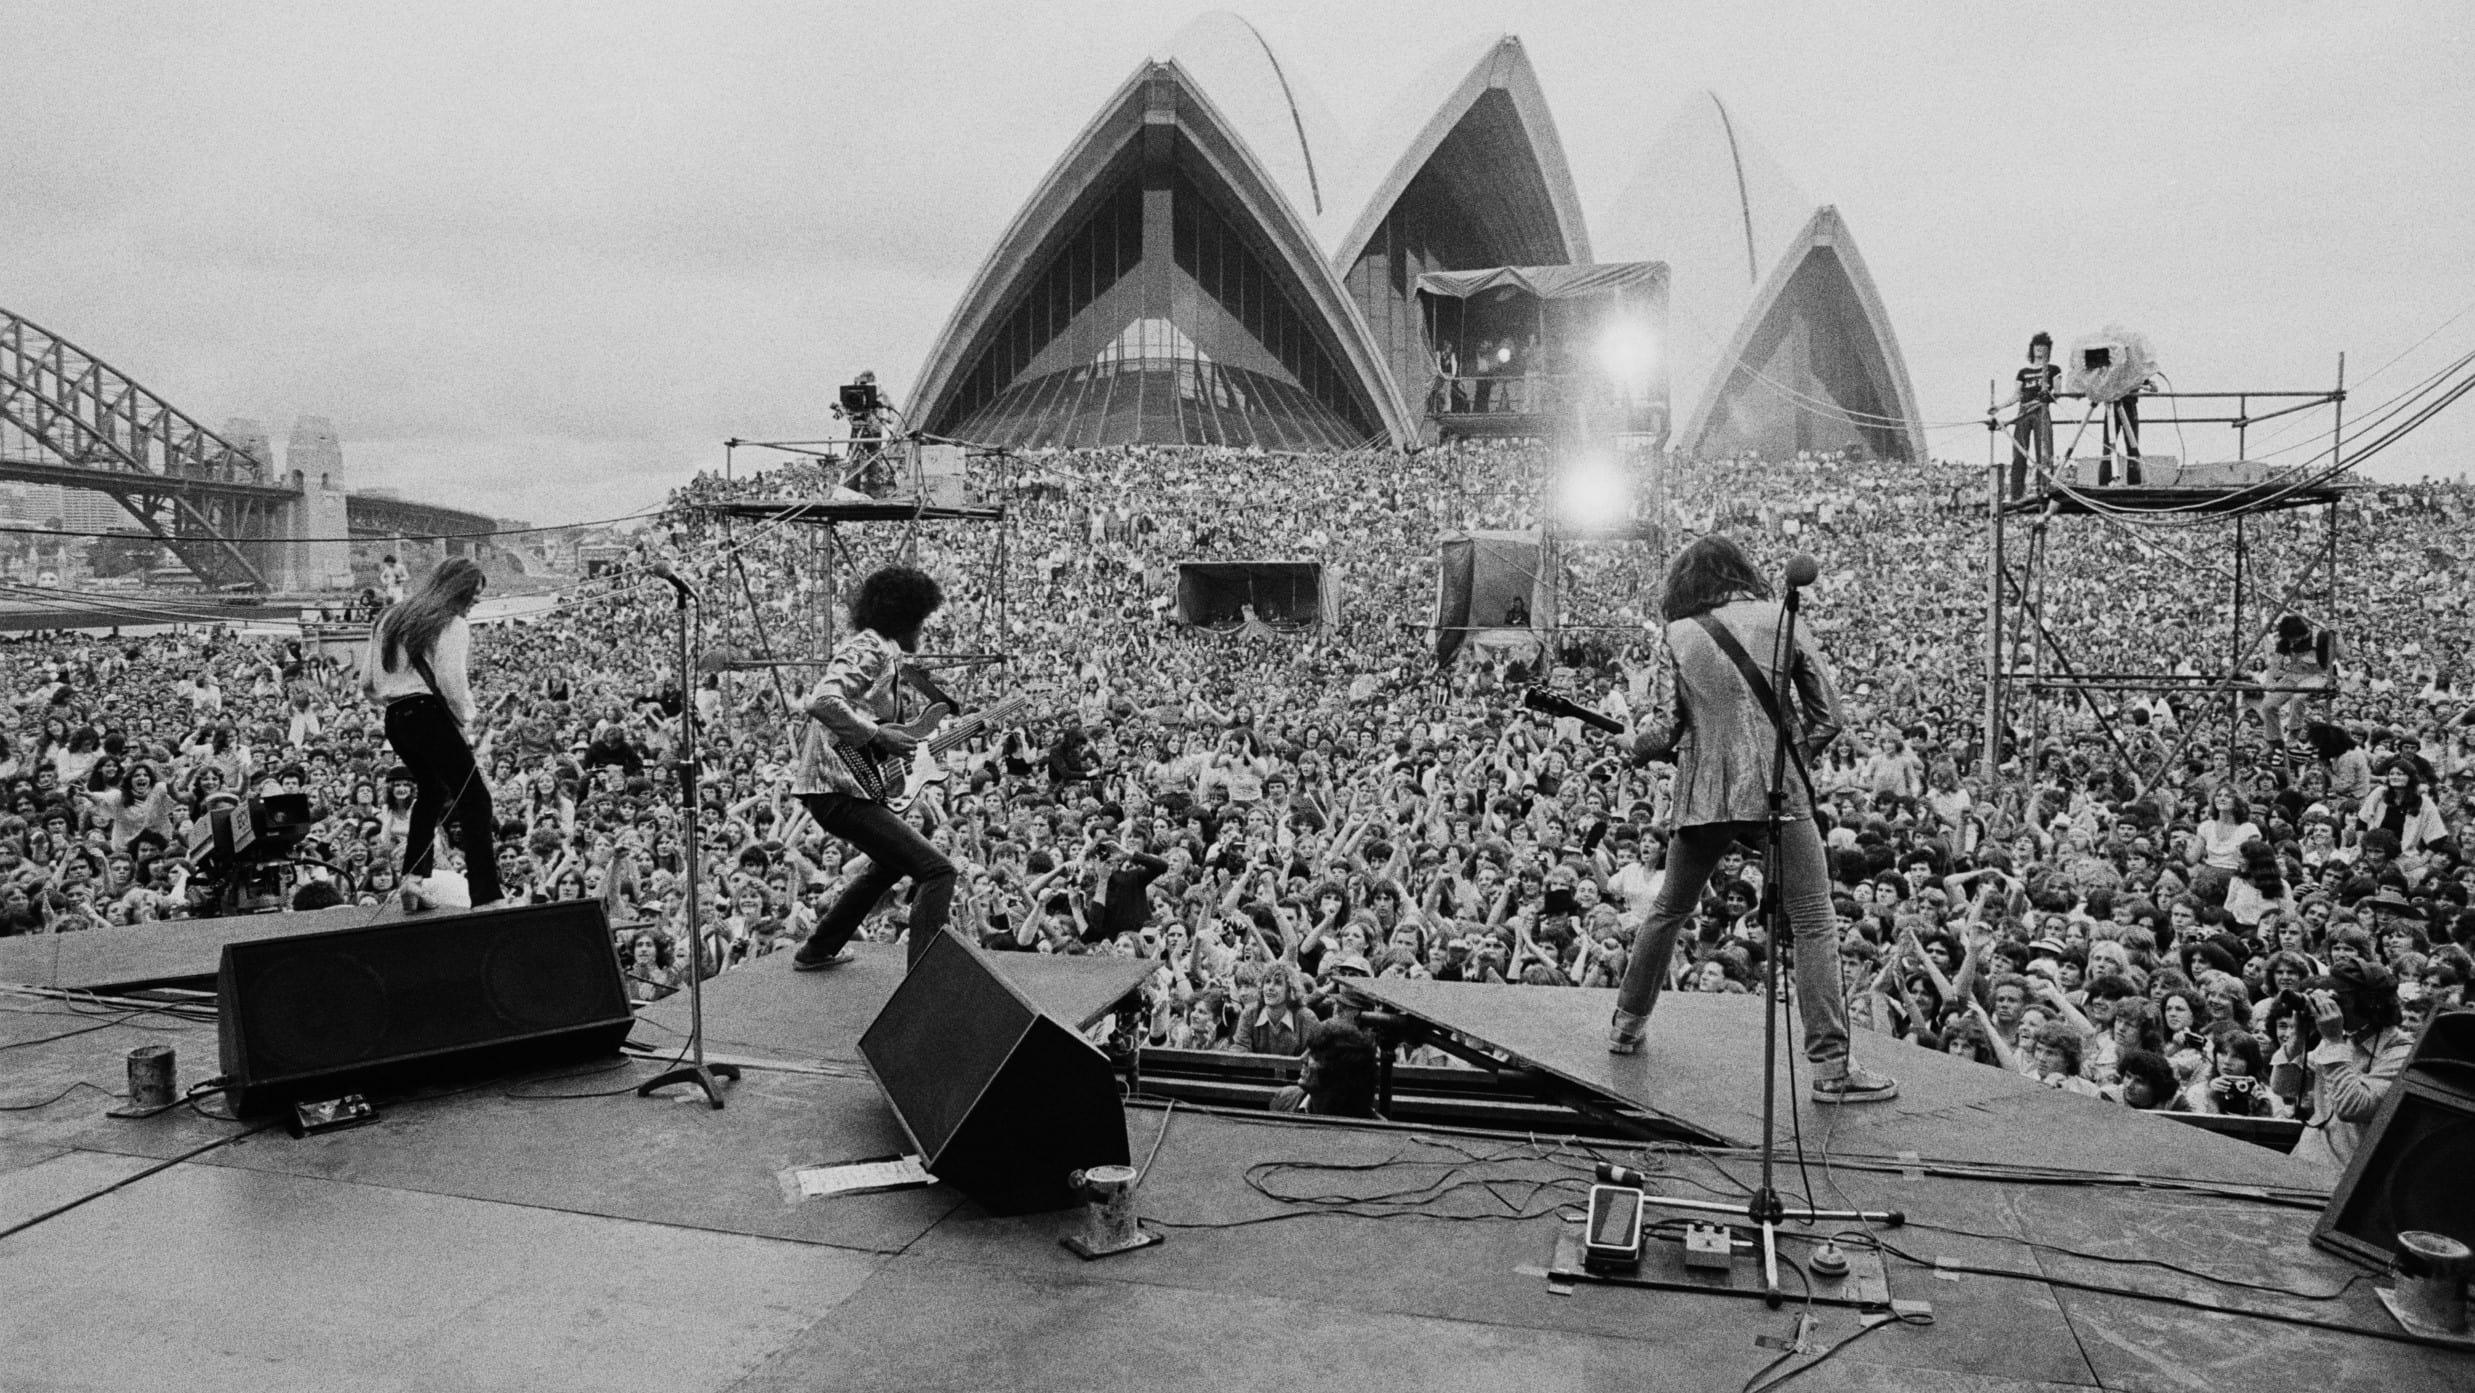 Thin Lizzy - The Boys Are Back In Town: Live At The Sydney Opera House October 1978 backdrop